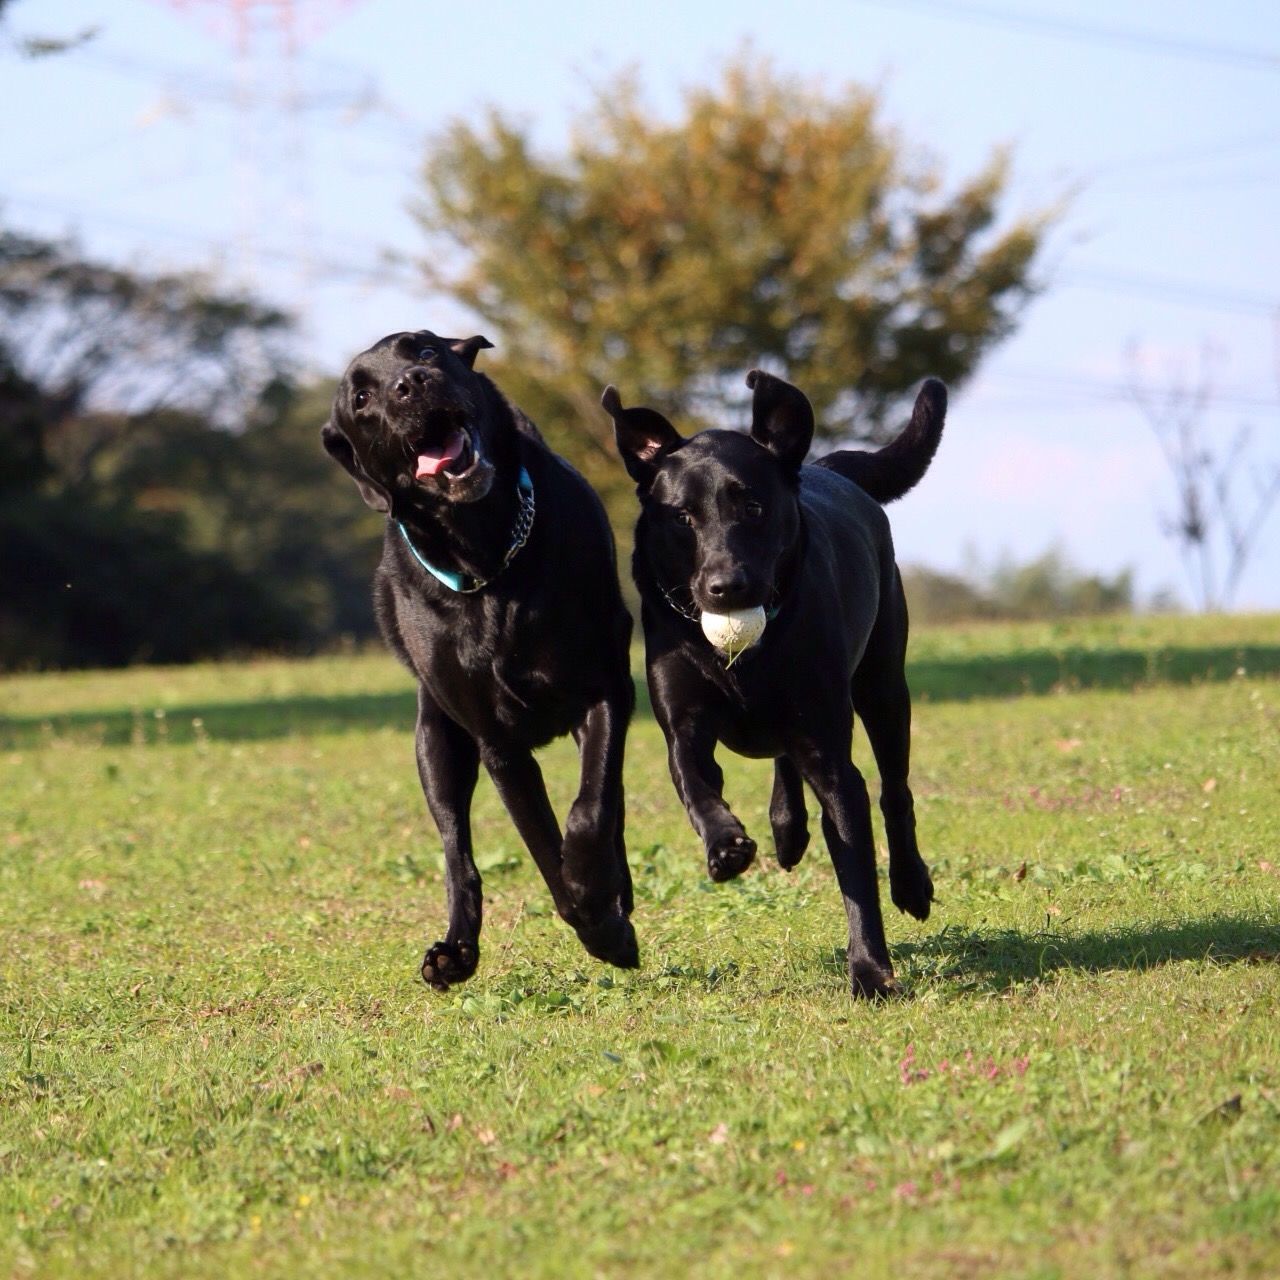 animal themes, domestic animals, dog, pets, grass, one animal, mammal, field, grassy, black color, full length, focus on foreground, two animals, running, day, green color, nature, outdoors, standing, selective focus